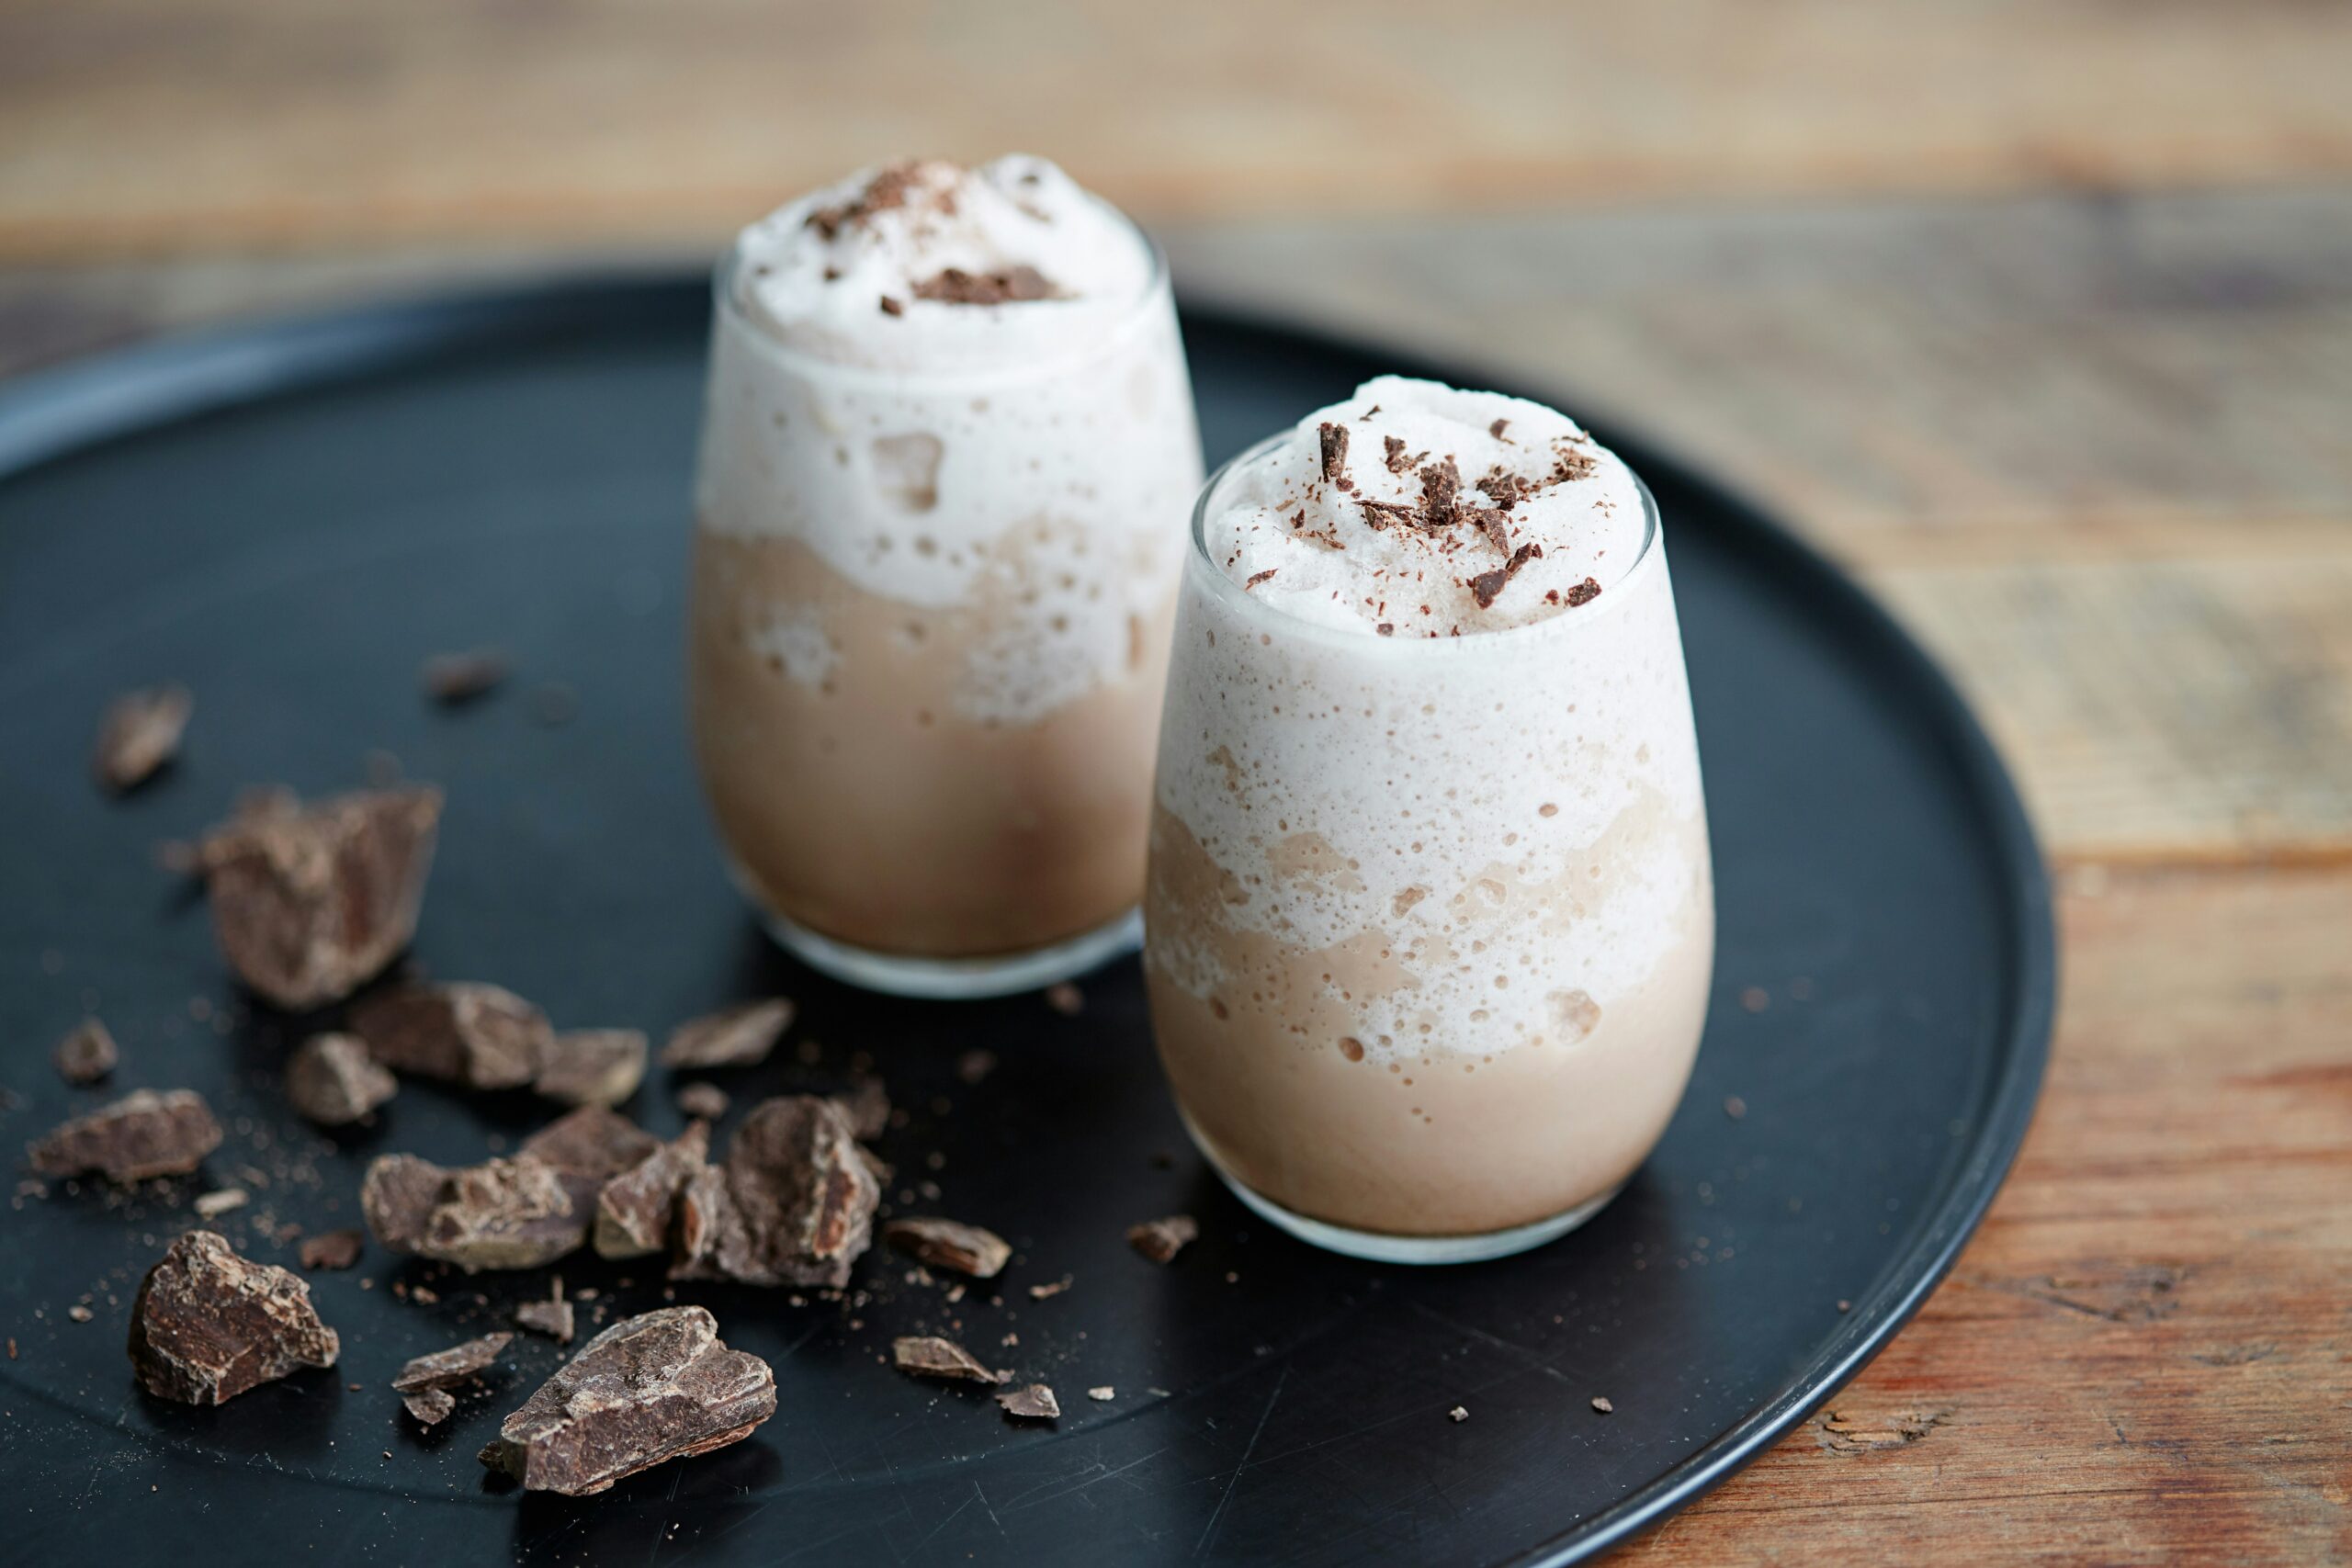 Chocolate is the perfect Valentine's Day treat and this love mocktail is great for a Galentine's Day celebration or date night. Pictured: Chocolate drink